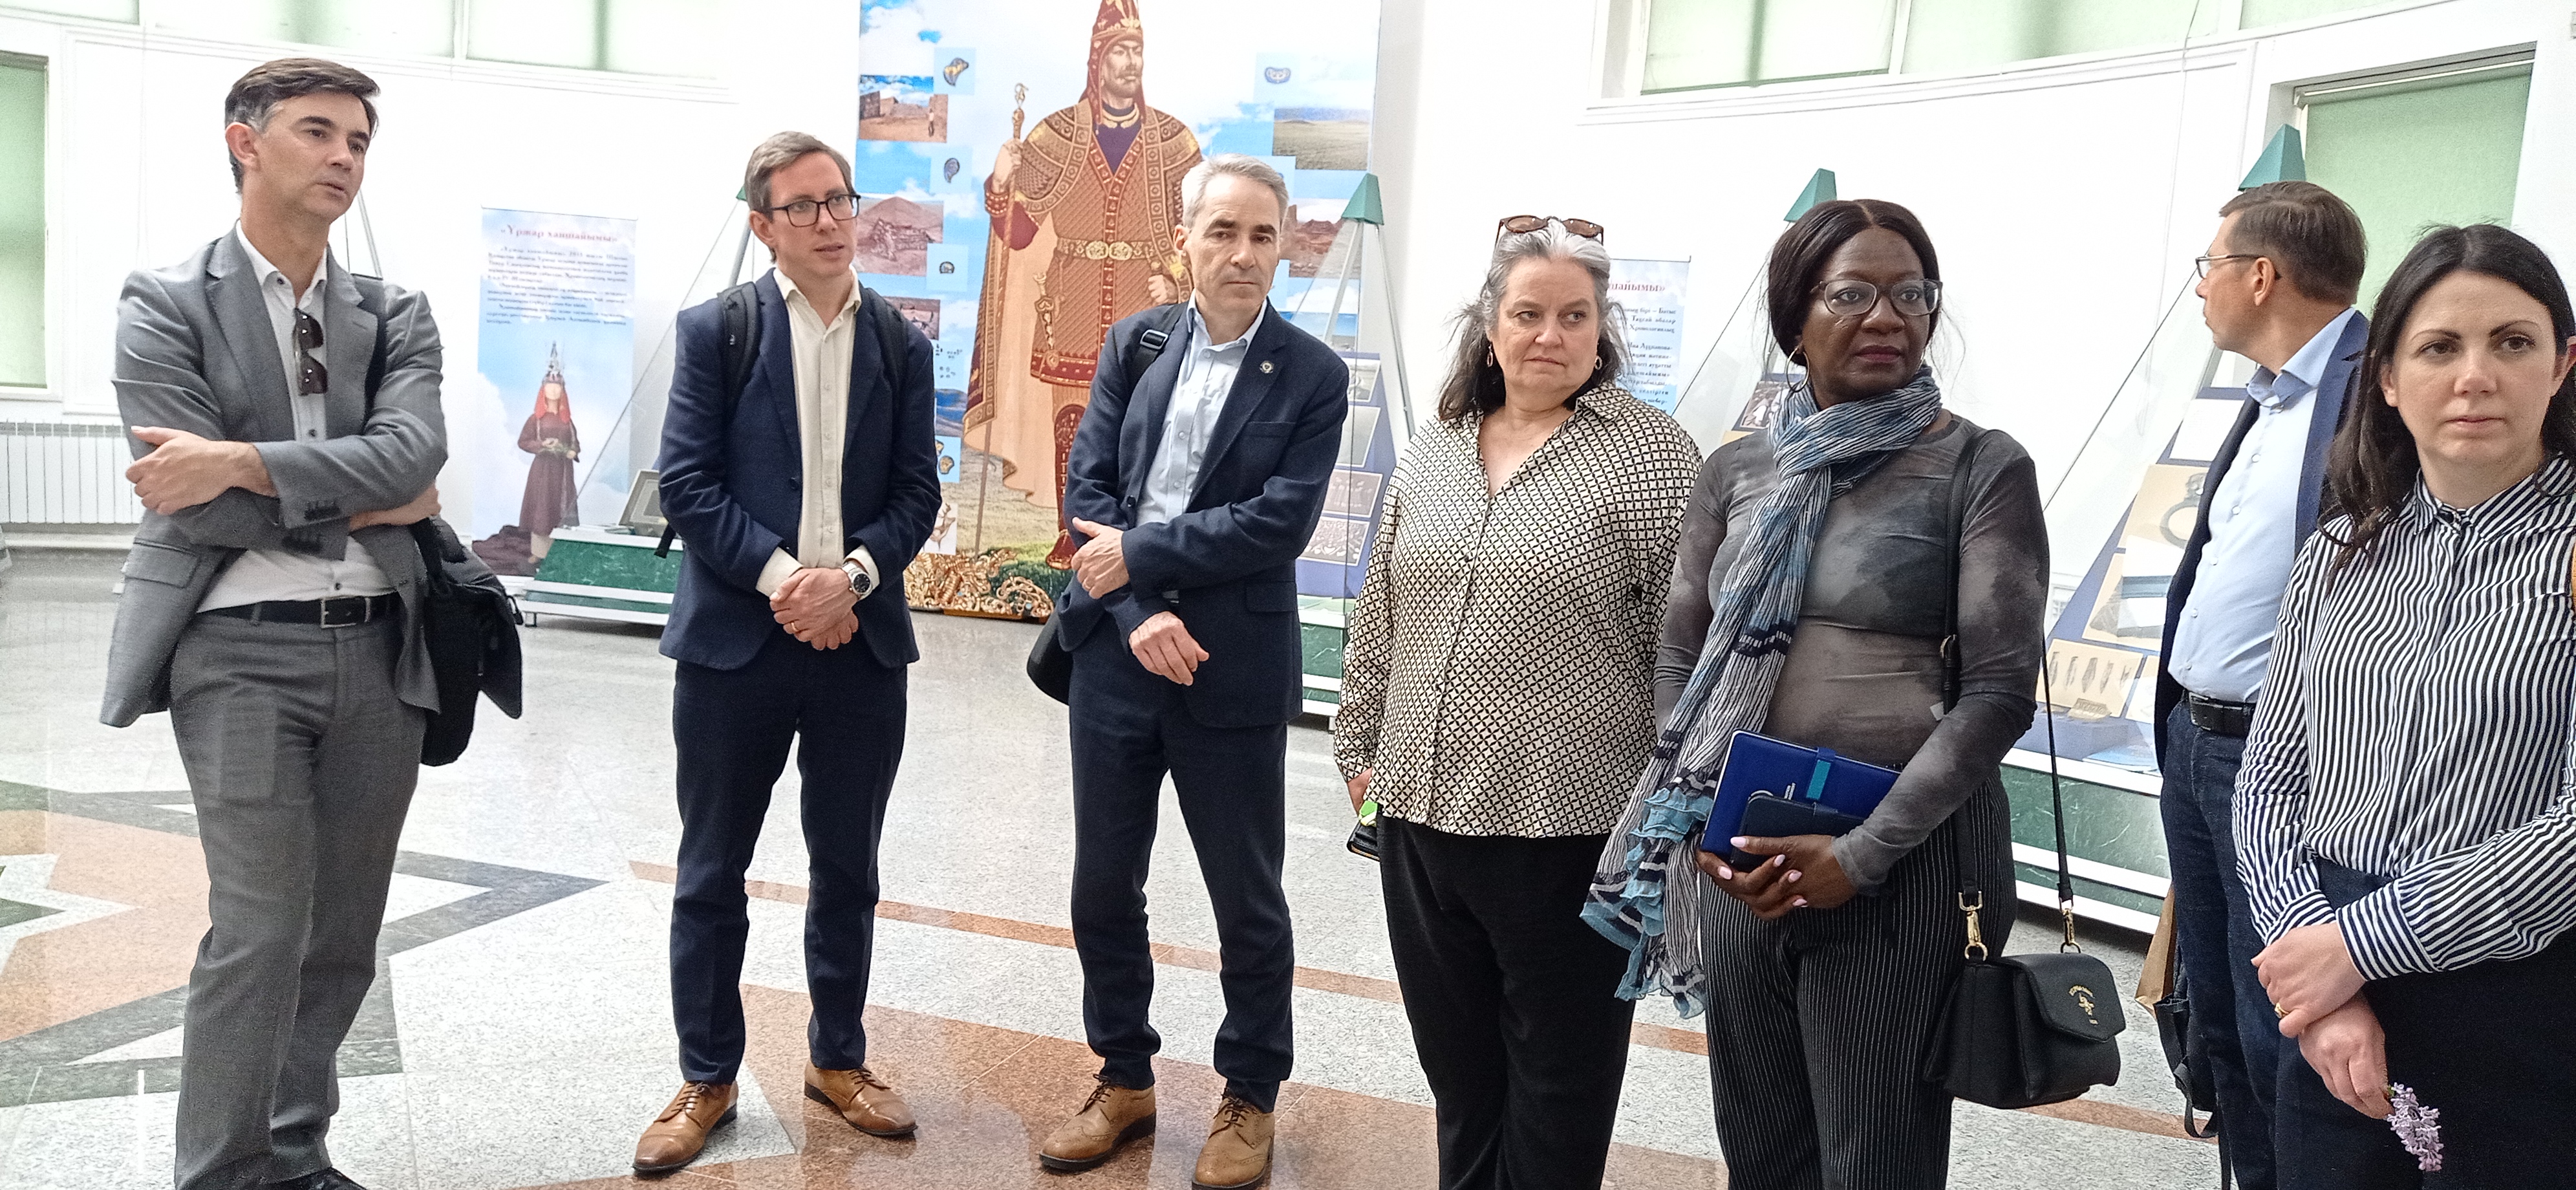 A delegation of British universities visited the Al-Farabi Kazakh National University  to establish partnership in the development of science and education